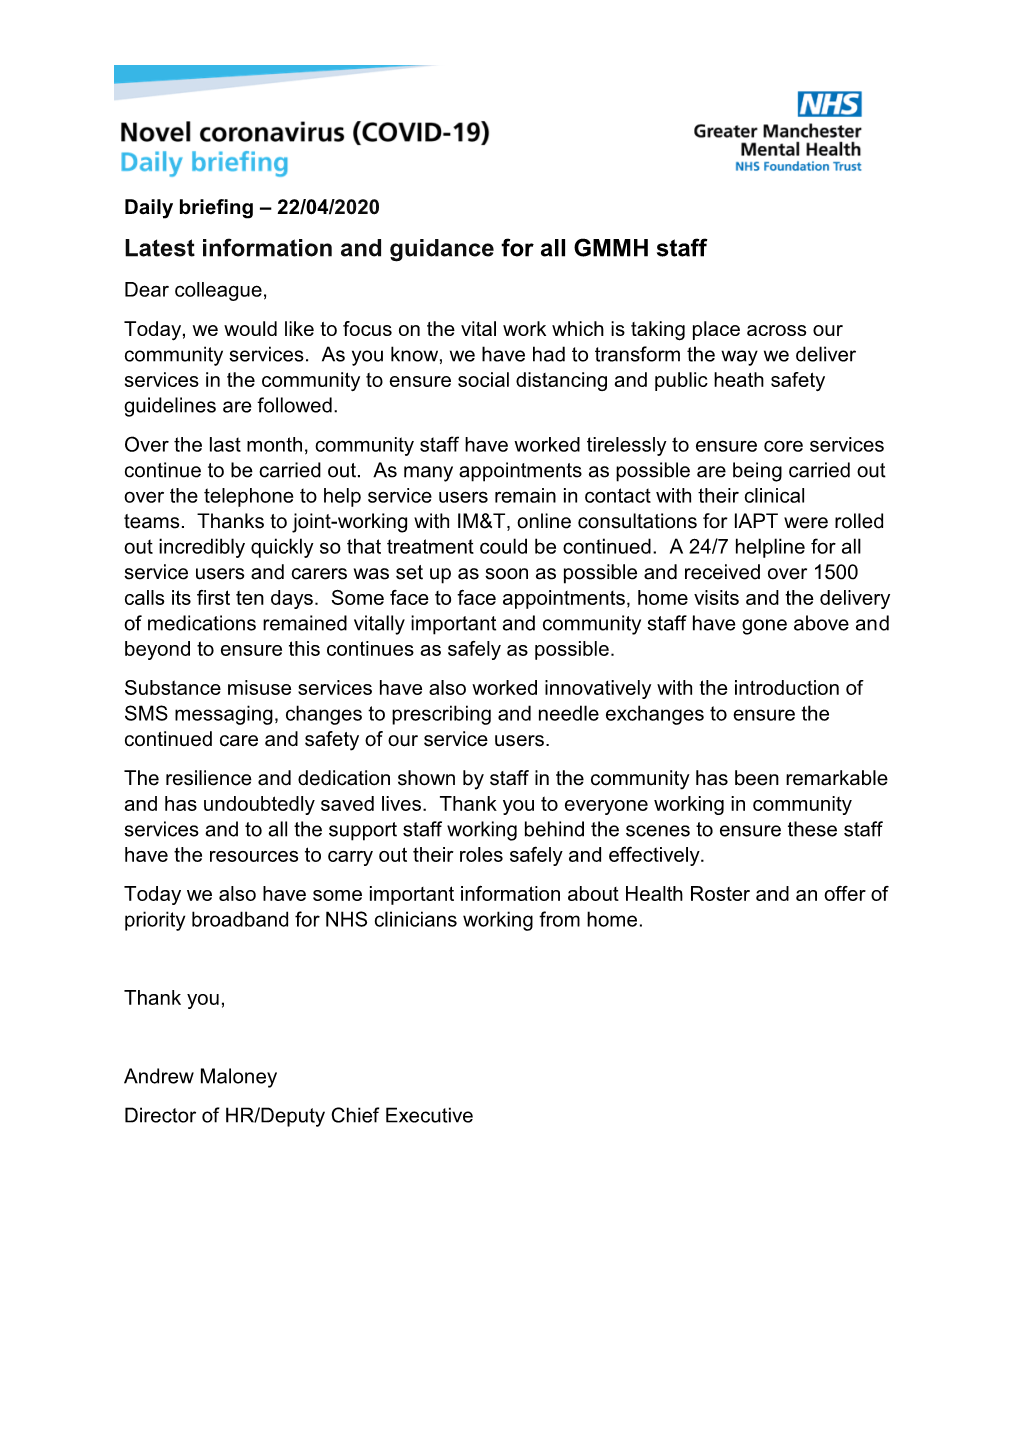 Latest Information and Guidance for All GMMH Staff Dear Colleague, Today, We Would Like to Focus on the Vital Work Which Is Taking Place Across Our Community Services